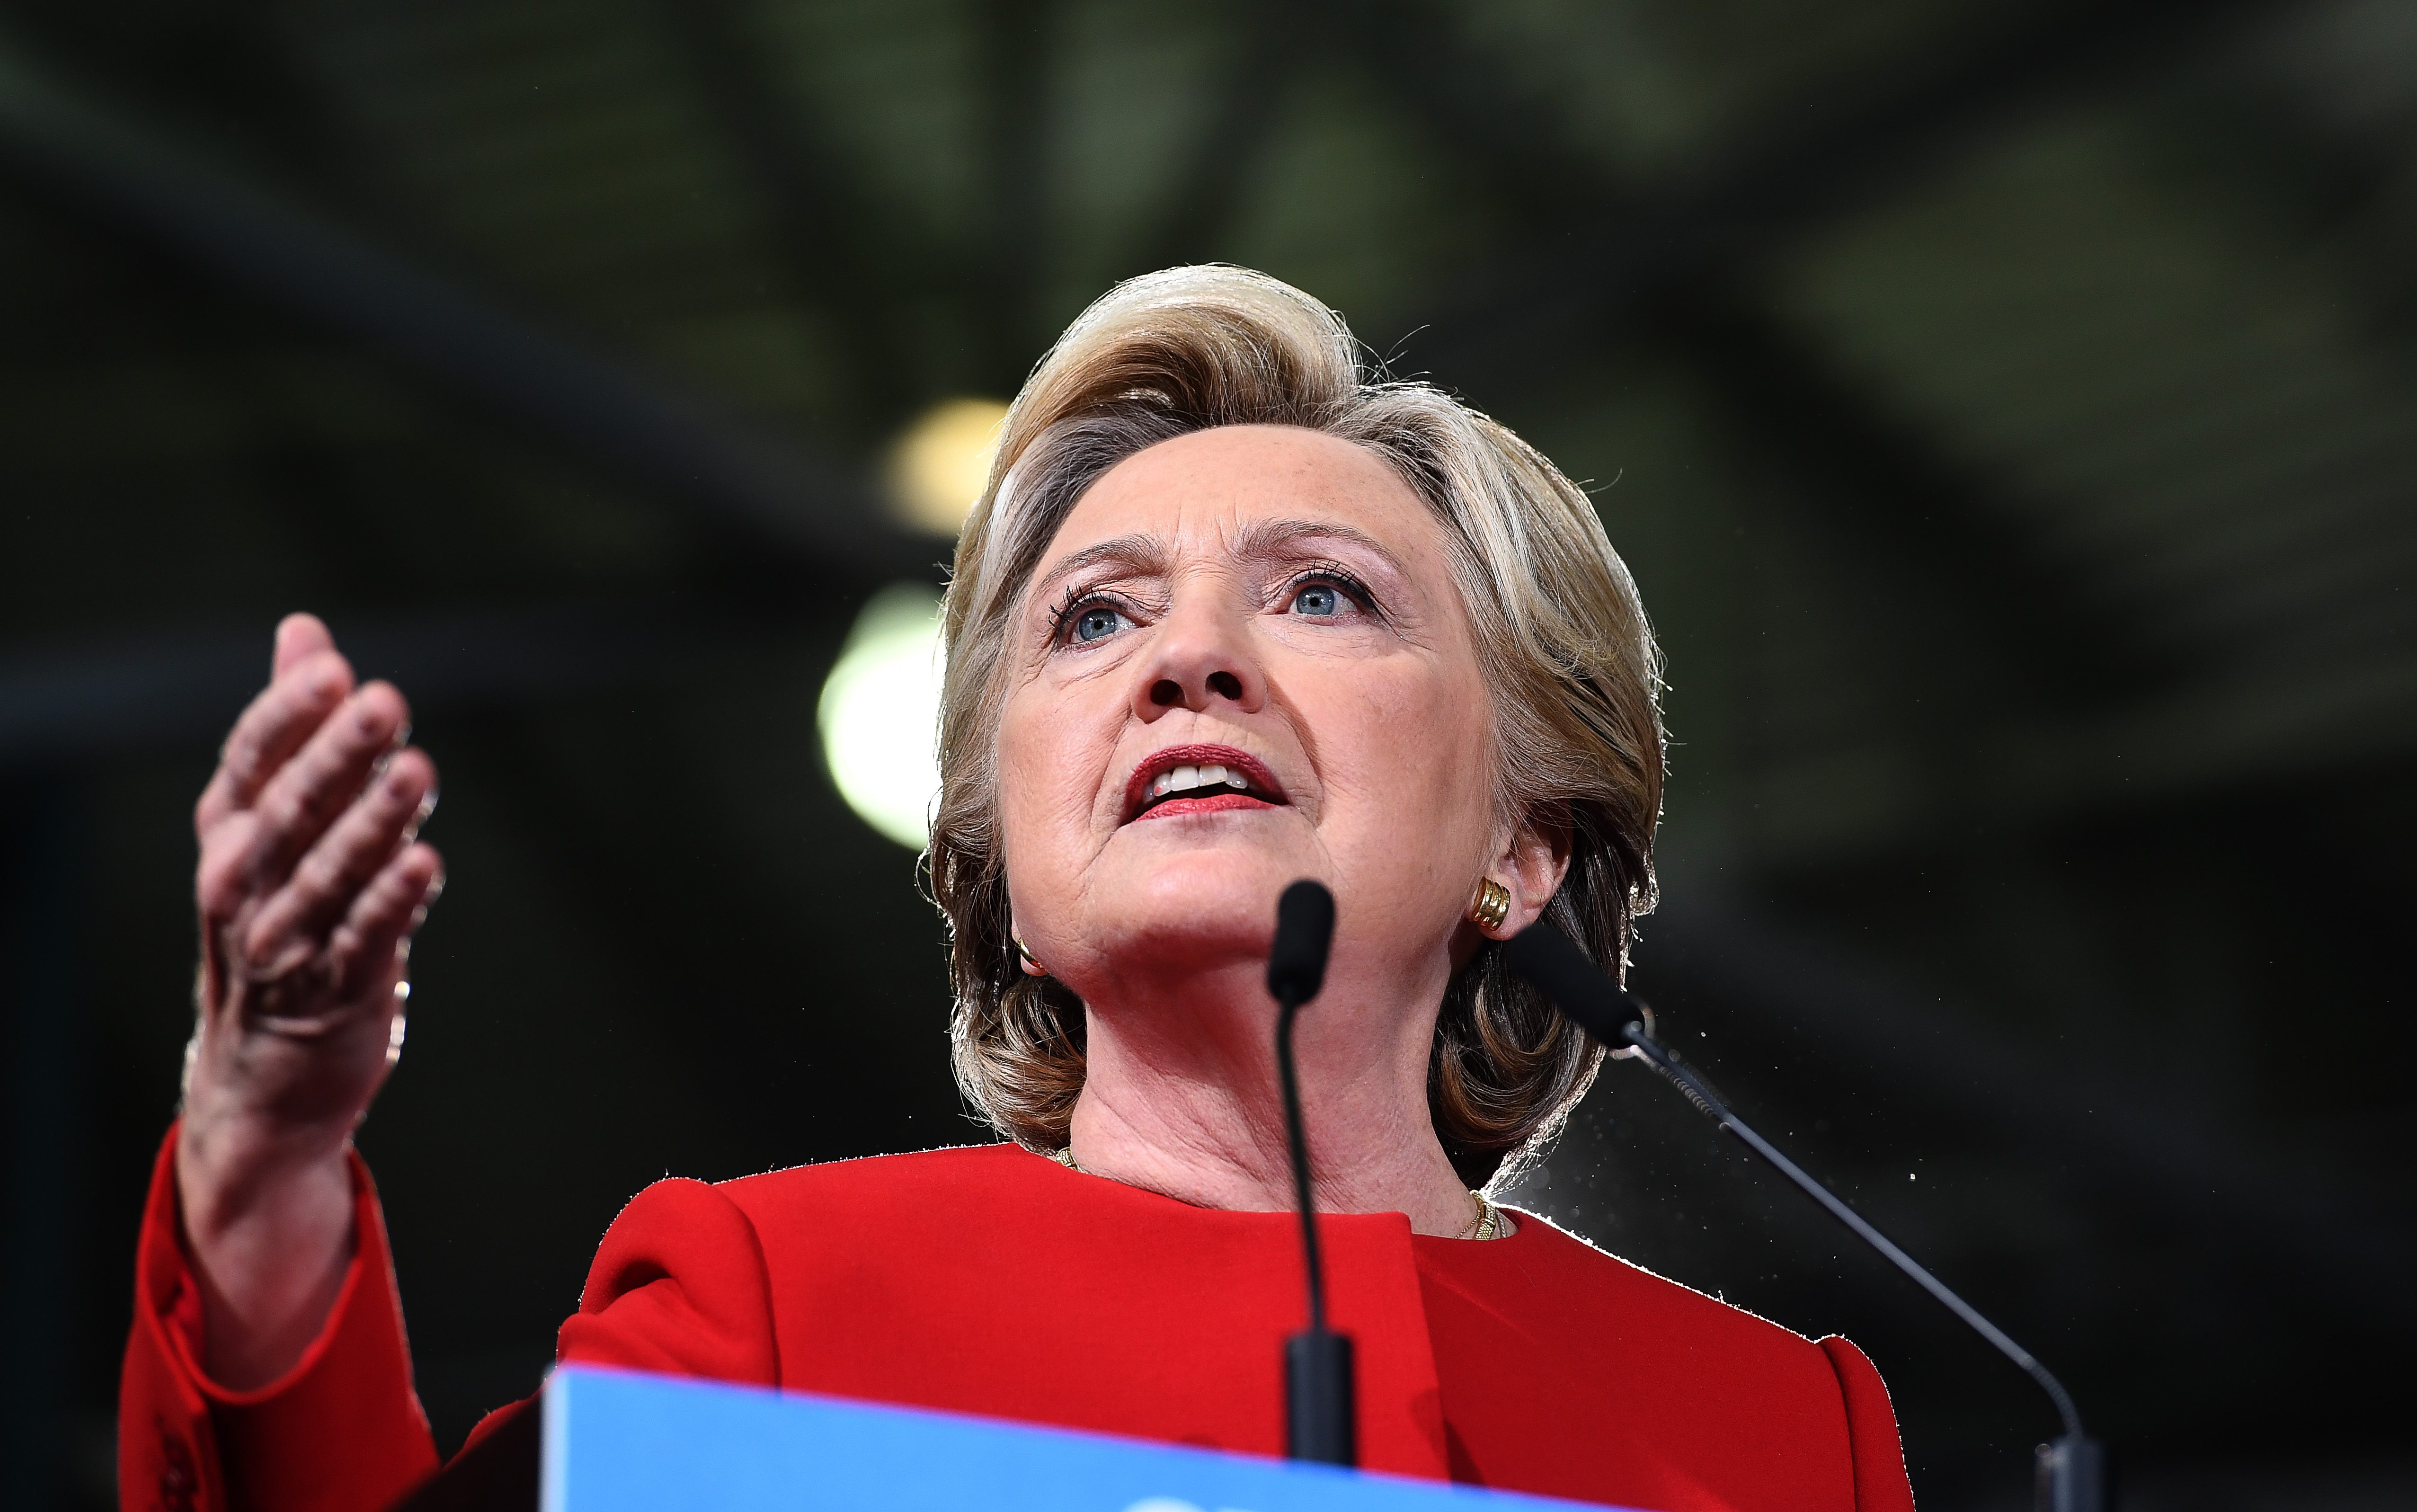 US Democratic presidential nominee Hillary Clinton speaks during a campaign rally at the Kent State University in Kent, Ohio, on October 31, 2016.  Clinton campaigned Monday for a third straight day without close aide Huma Abedin, linked by media to the renewed FBI probe into the former secretary of state's use of a private email server.  / AFP PHOTO / Jewel SAMAD